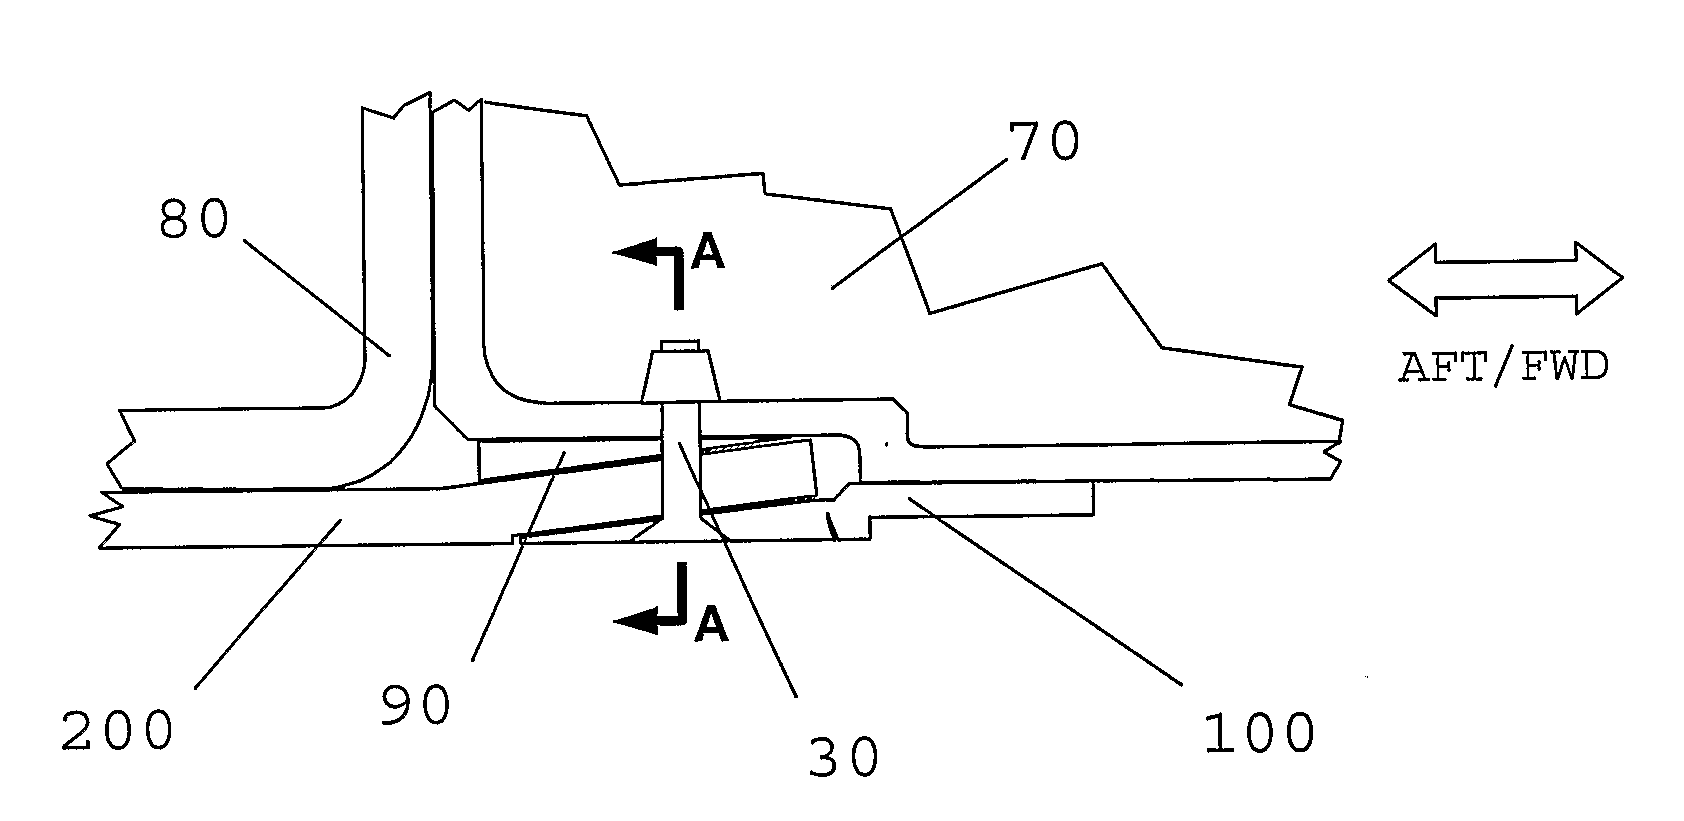 Joint for Use in Aircraft Construction